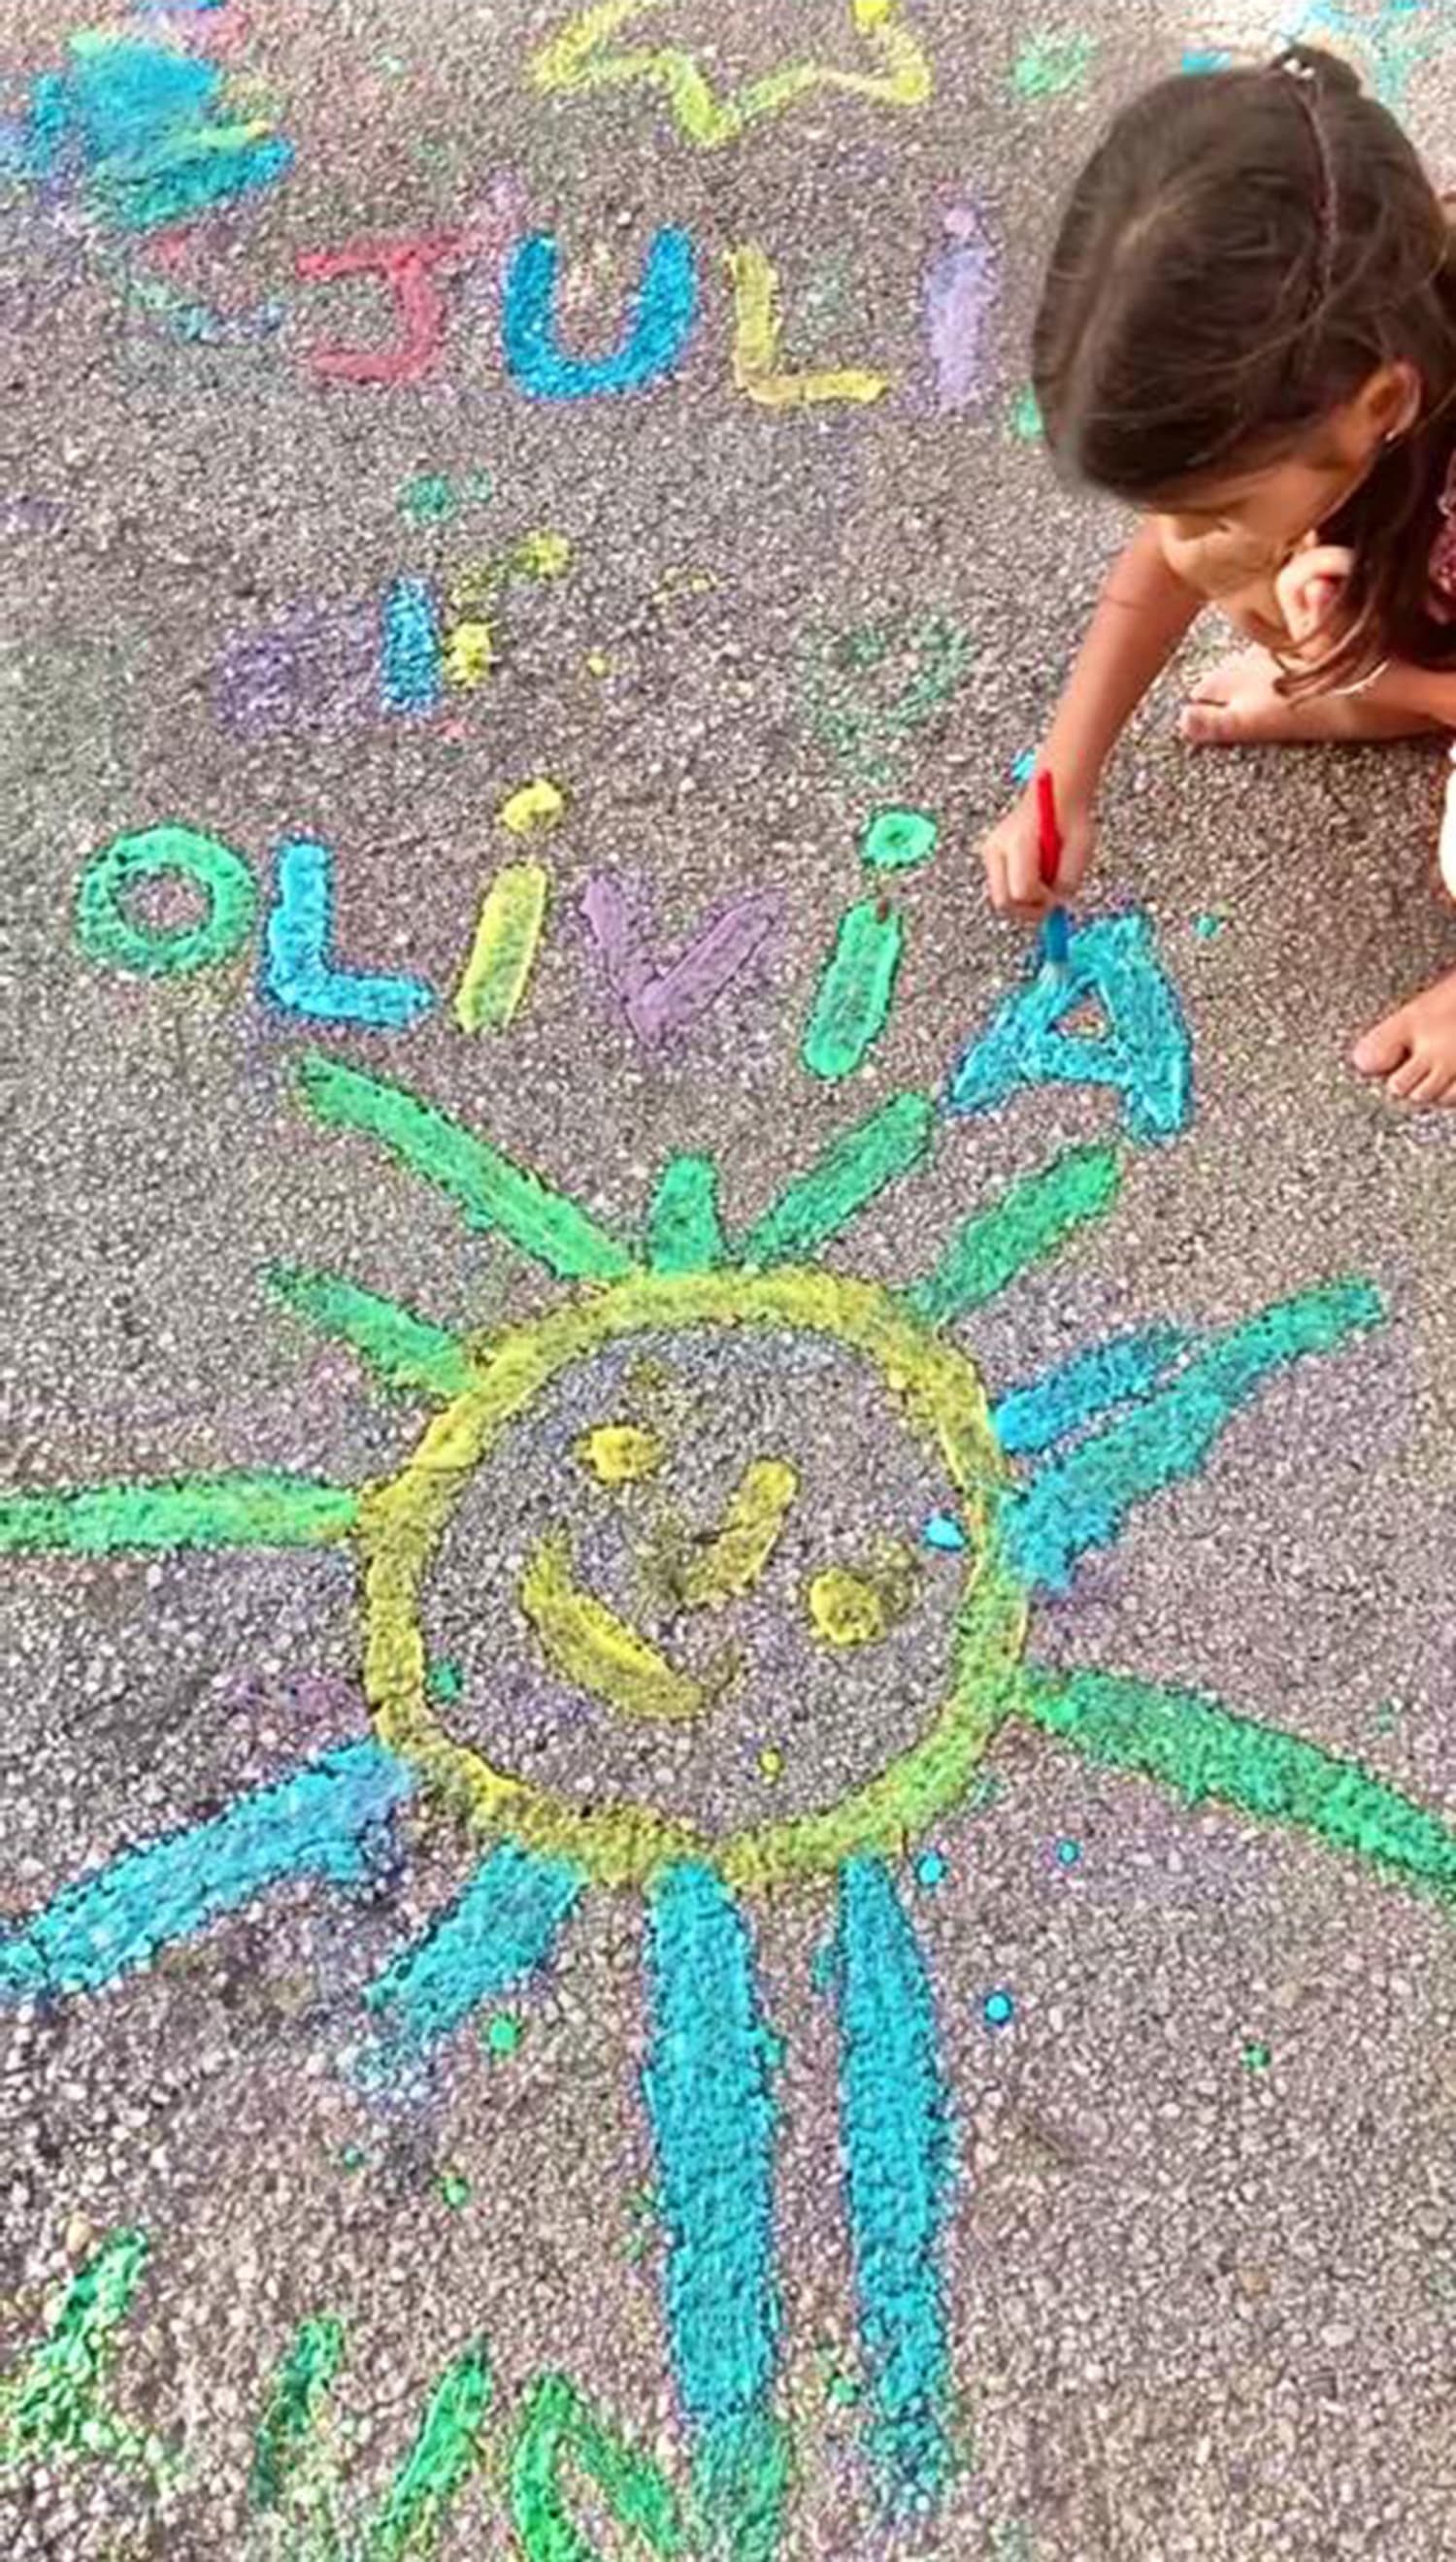 18 Easy Art Activities for Kids to Do at Home